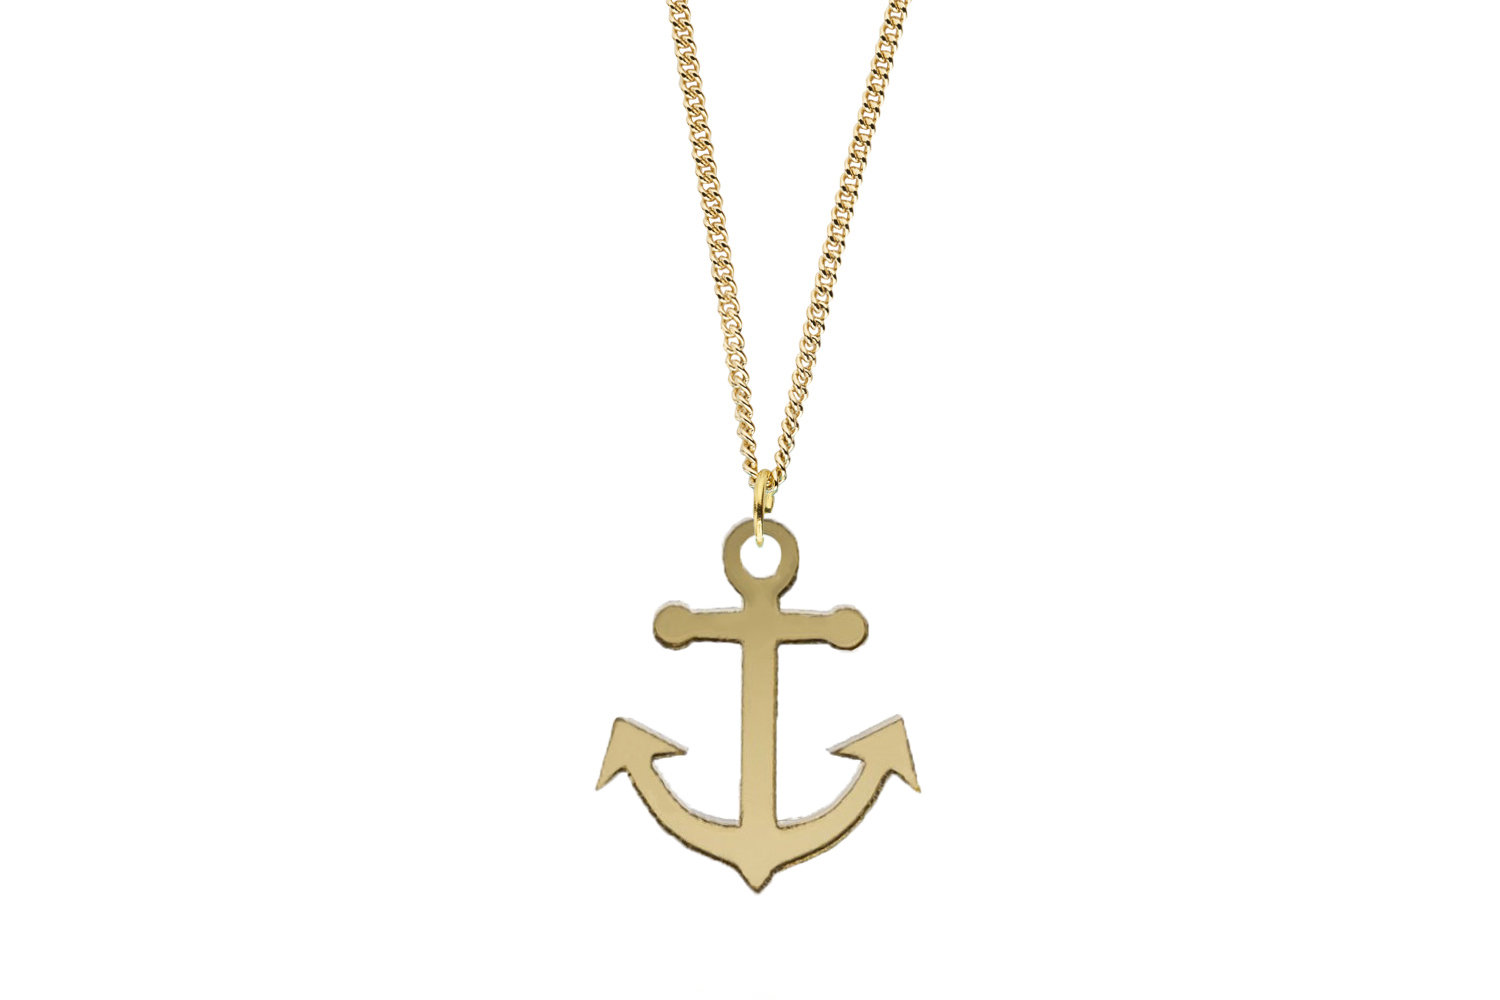 Anchor Pendant Sculpted Style on Chain Necklace